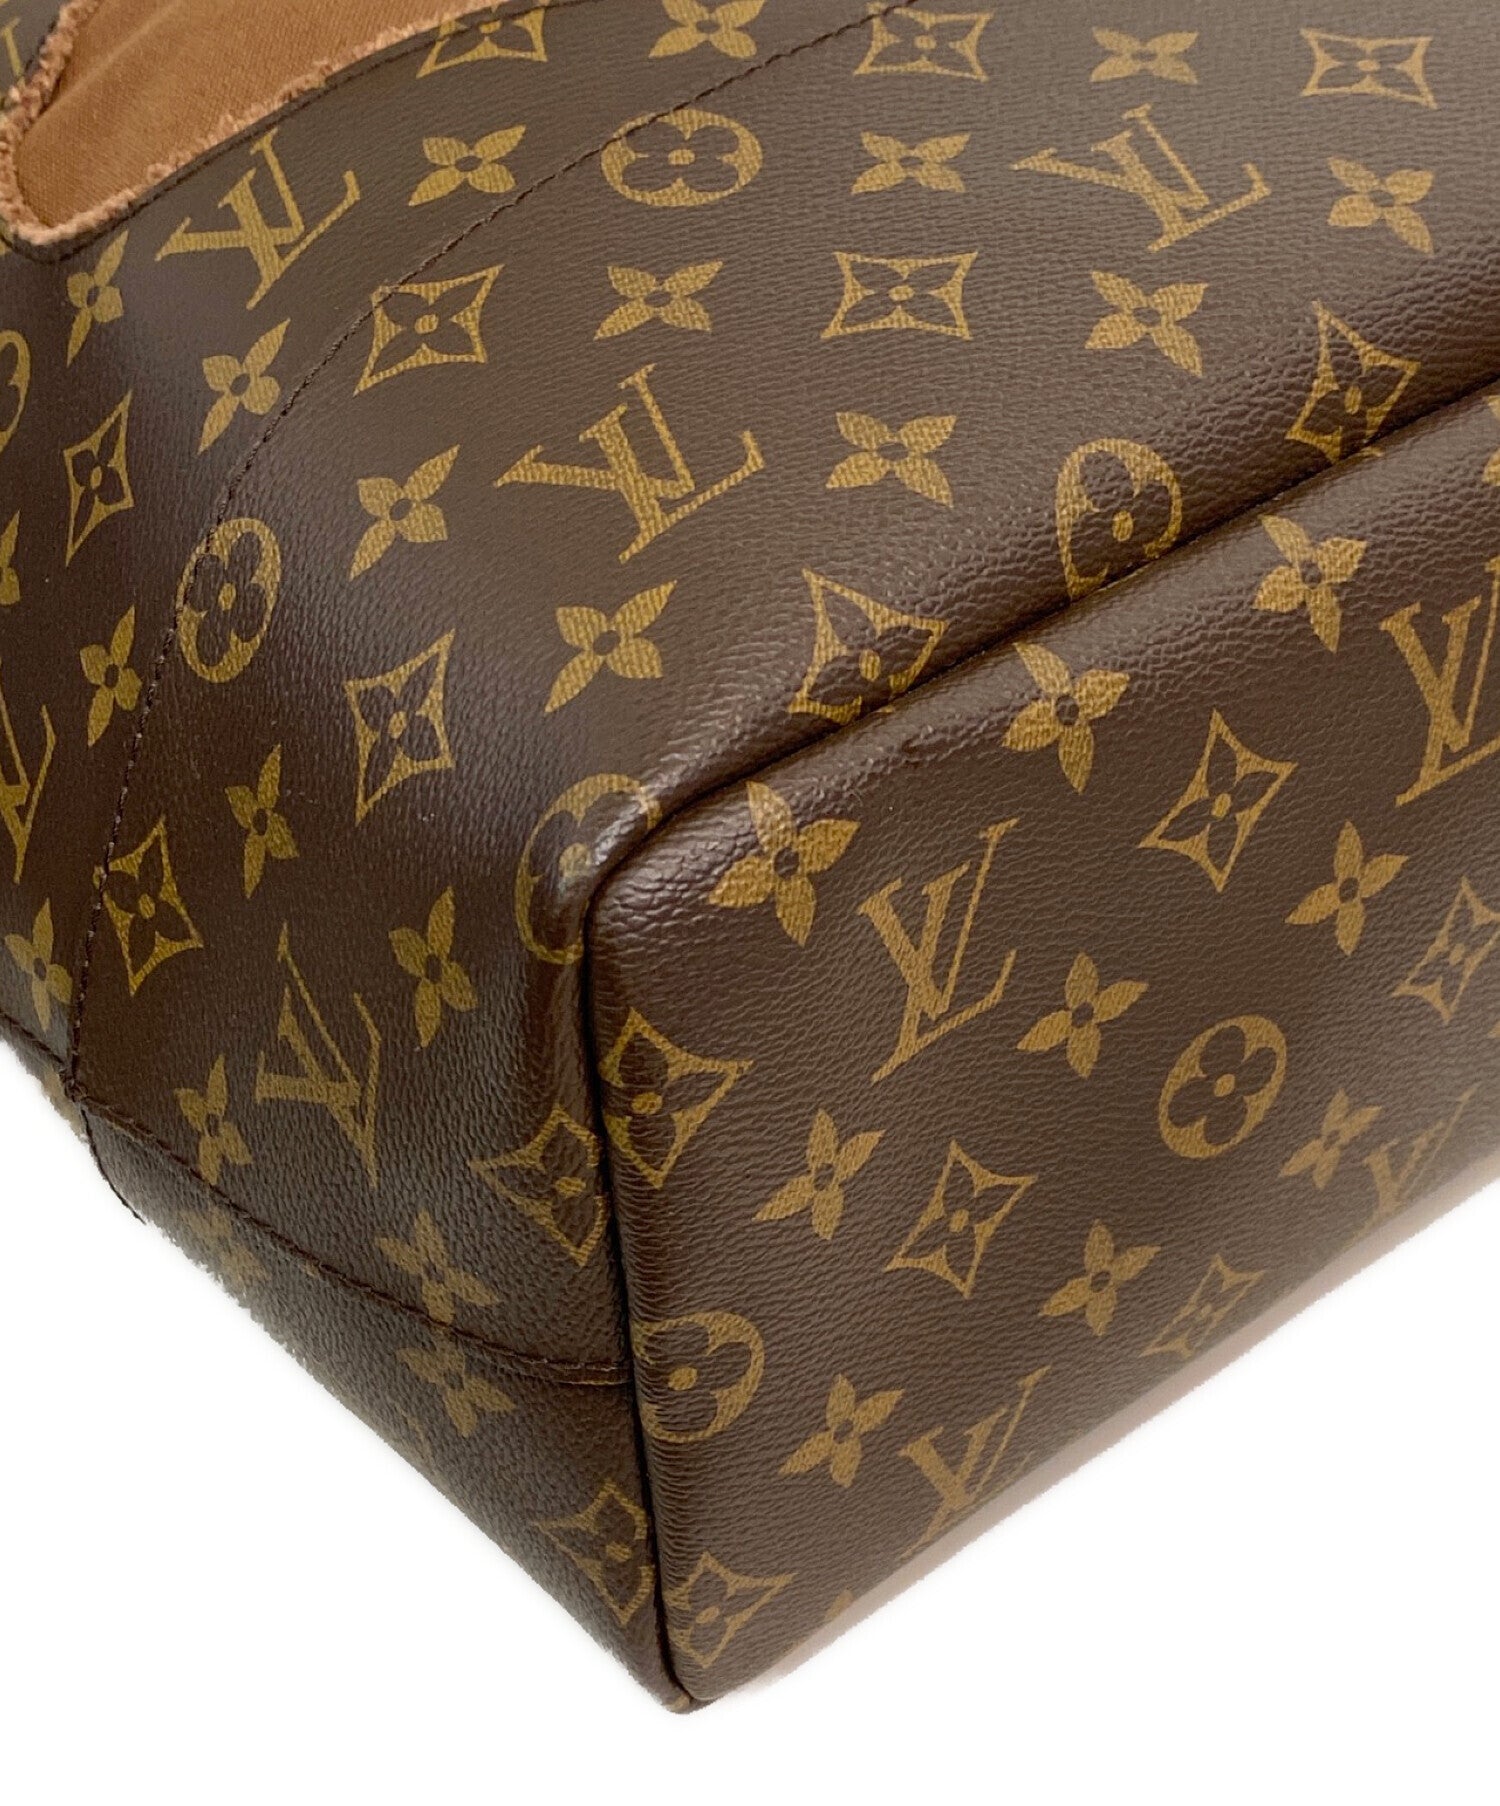 LOUIS VUITTON Bag With Hole Tote Bag M40279